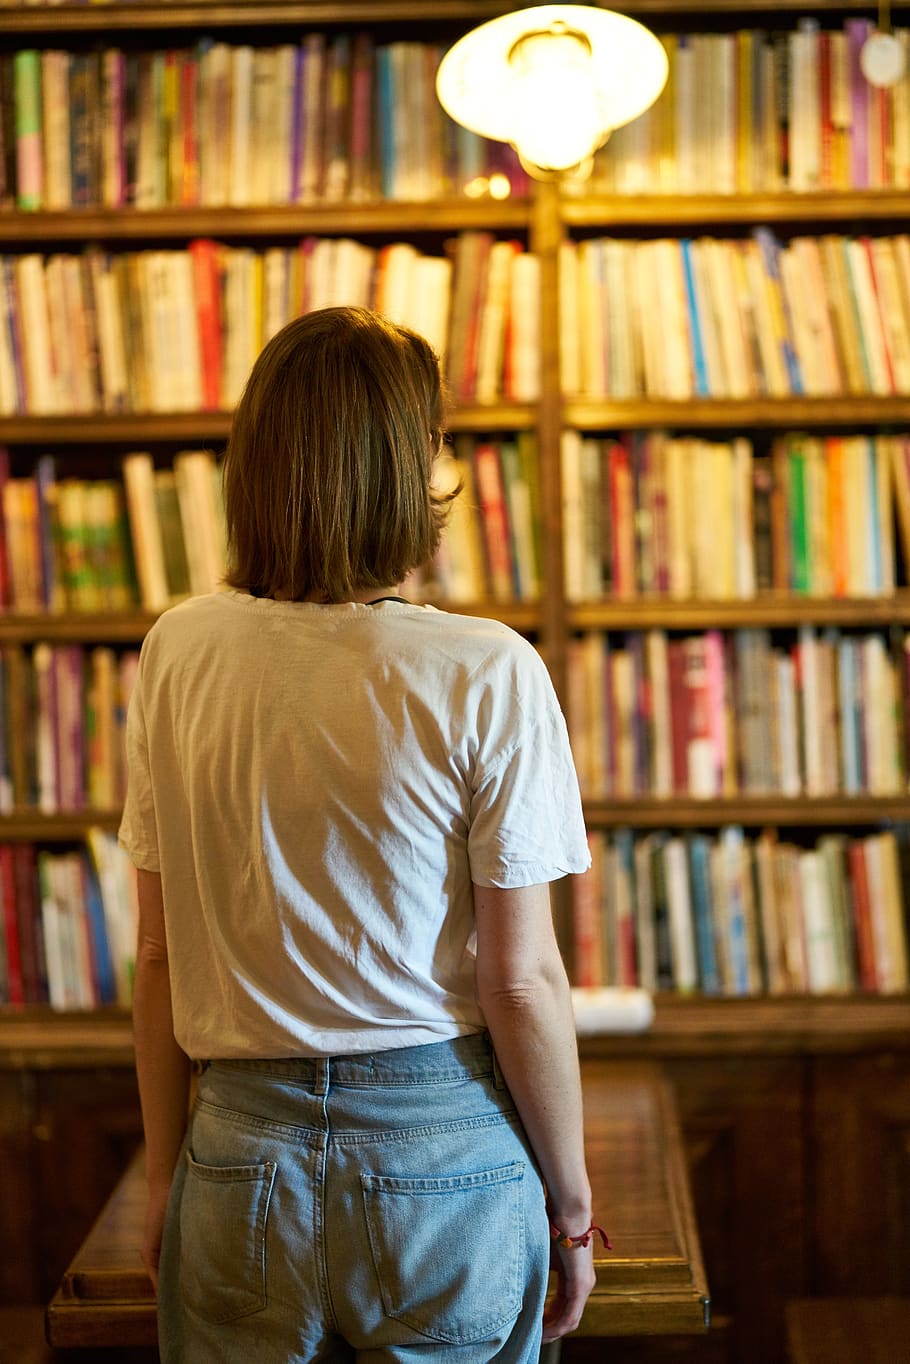 woman, rear, library, look, overview, book, read, education, course, work